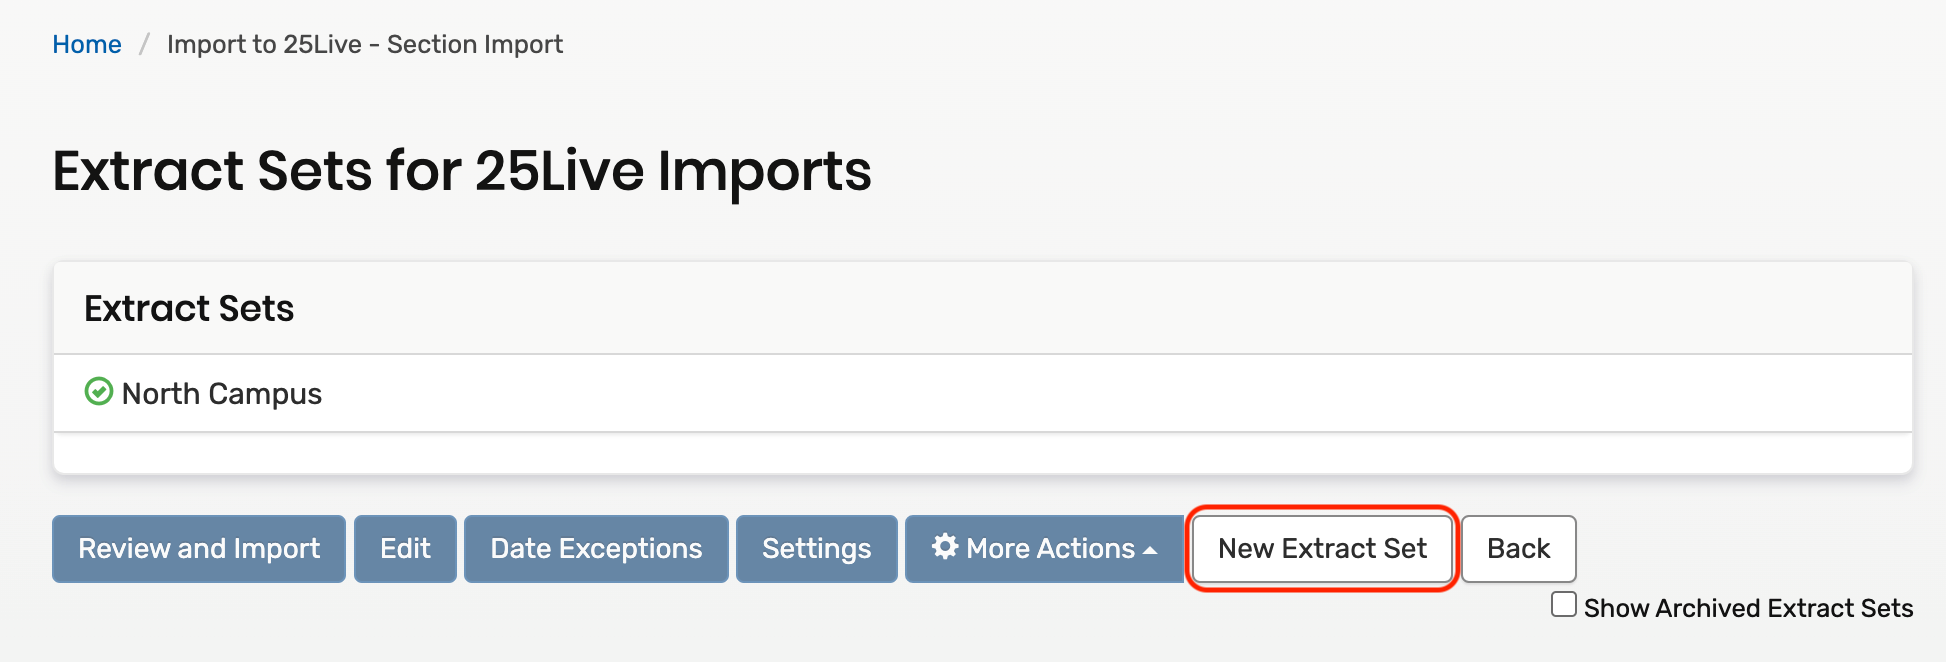 new extract set button on the section import page